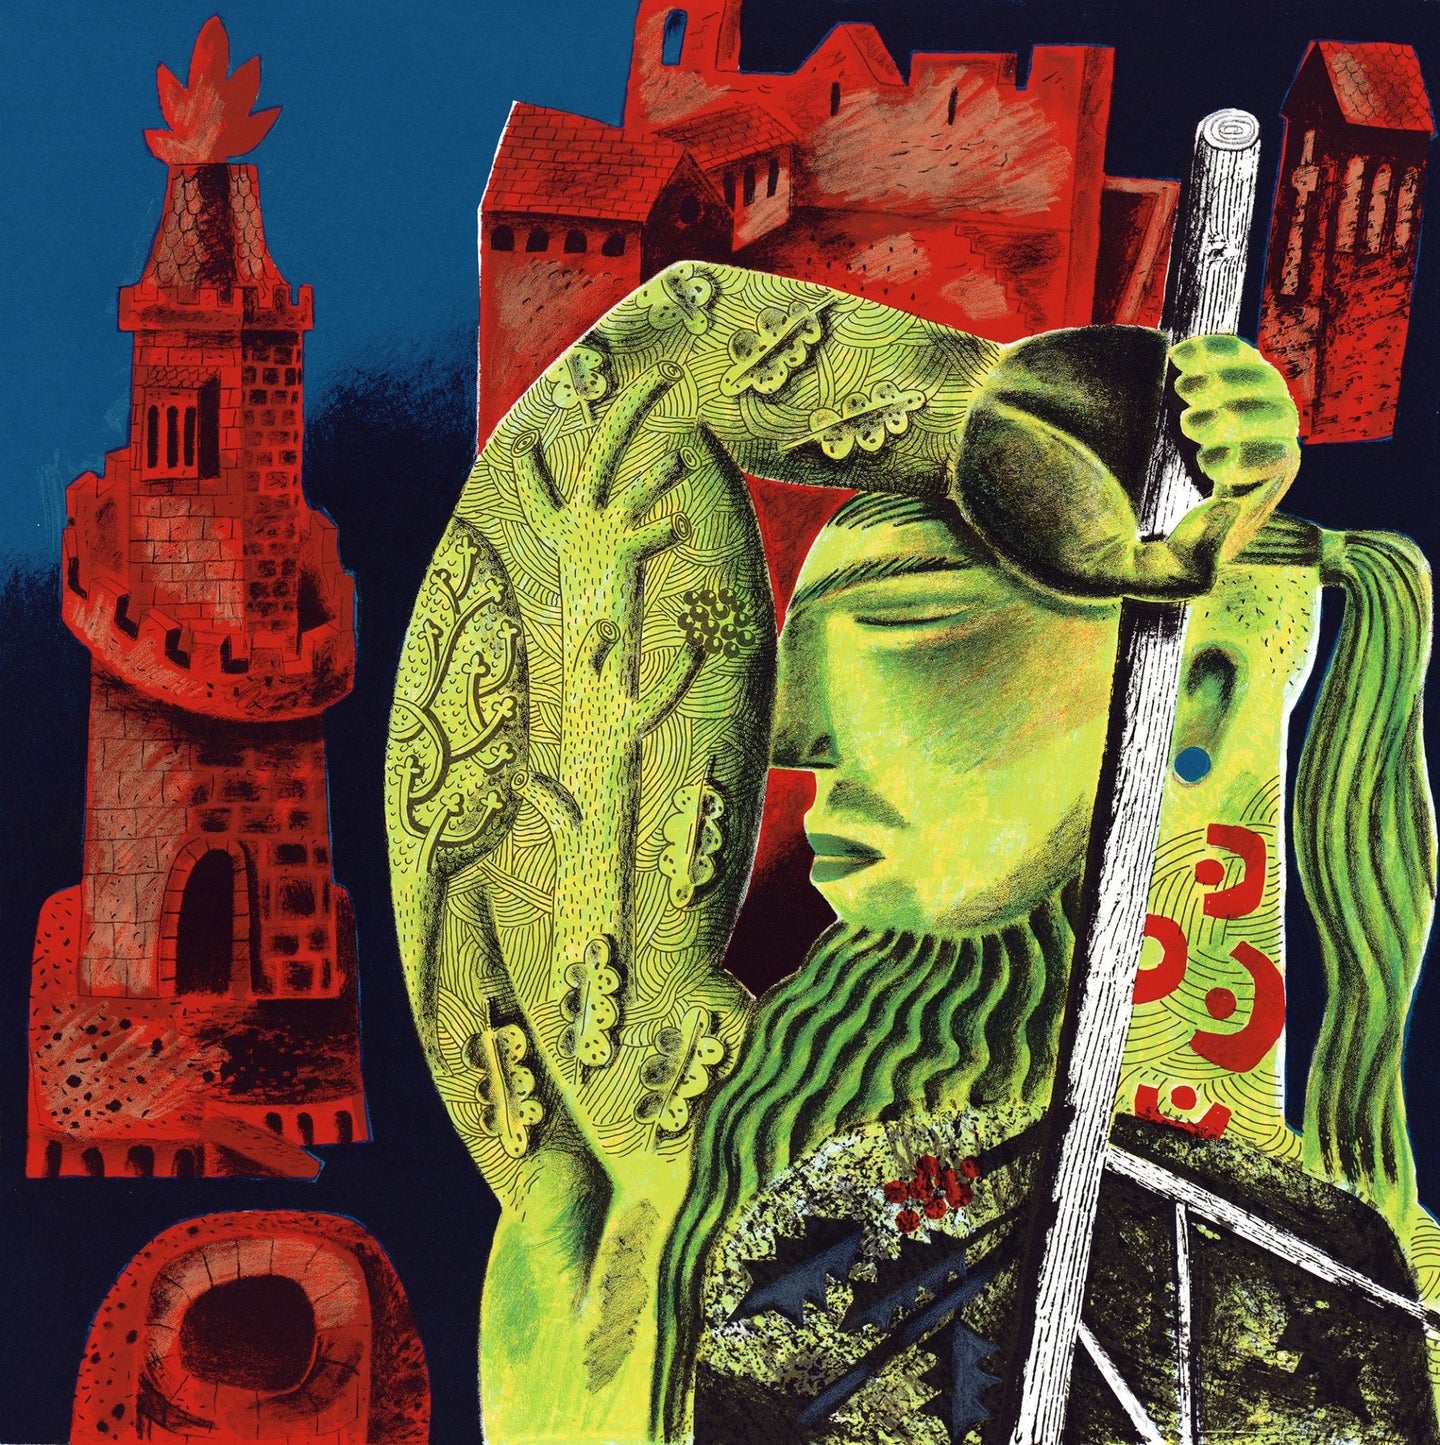 The Green Knight Arrives, an original screen print by Clive Hicks-Jenkins and the Penfold Press